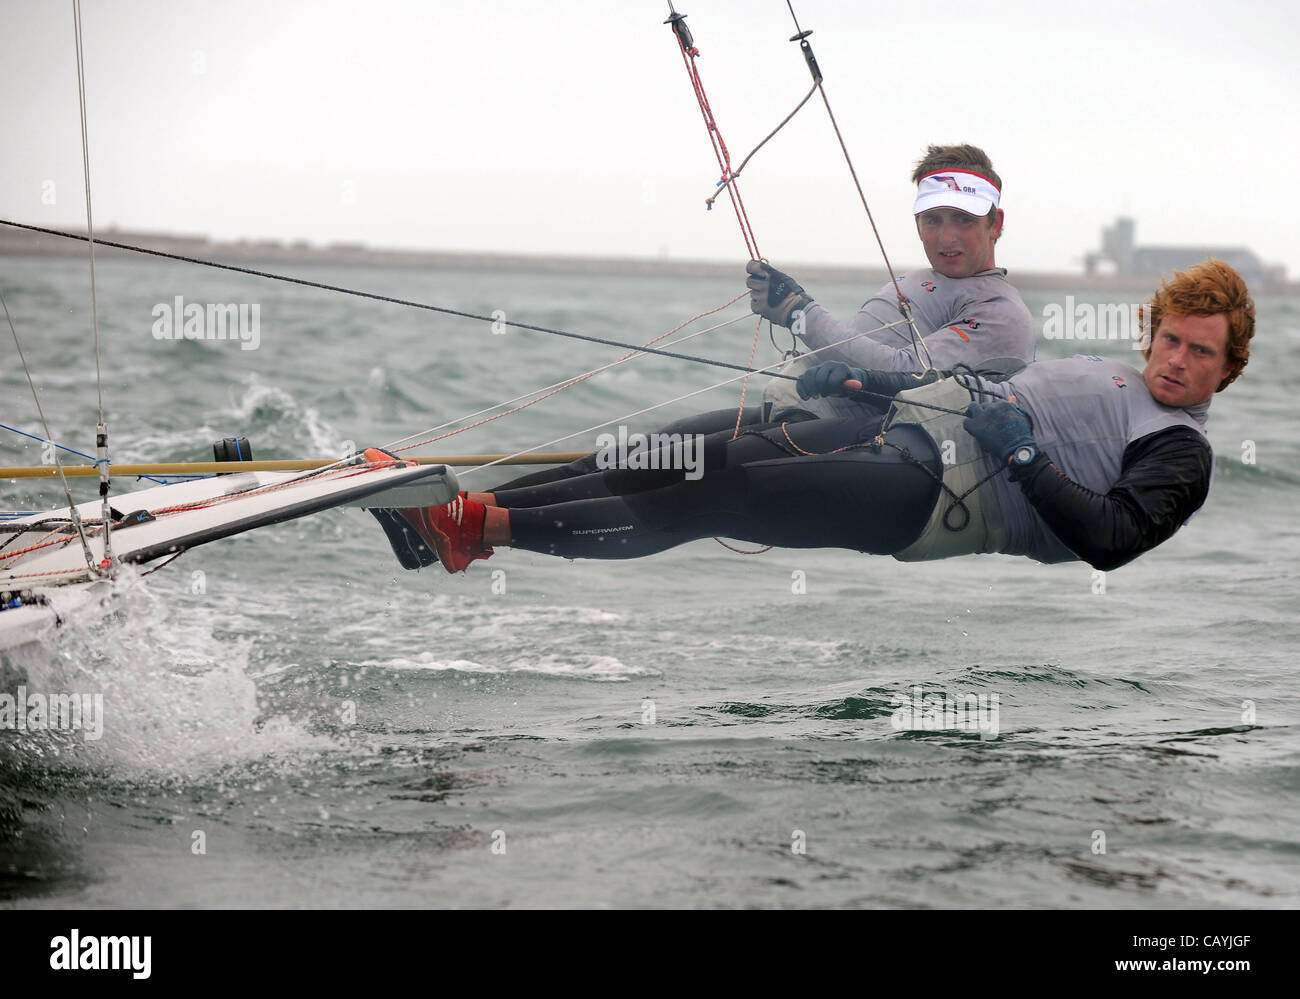 The last Olympic sailors selected for Team GB announced today at Portland, Dorset. Stevie Morrison, helm and Ben Rhodes thrilled to be sailing in the 49ER Class. 12/05/2012 PICTURE BY: DORSET MEDIA SERVICE. Stock Photo